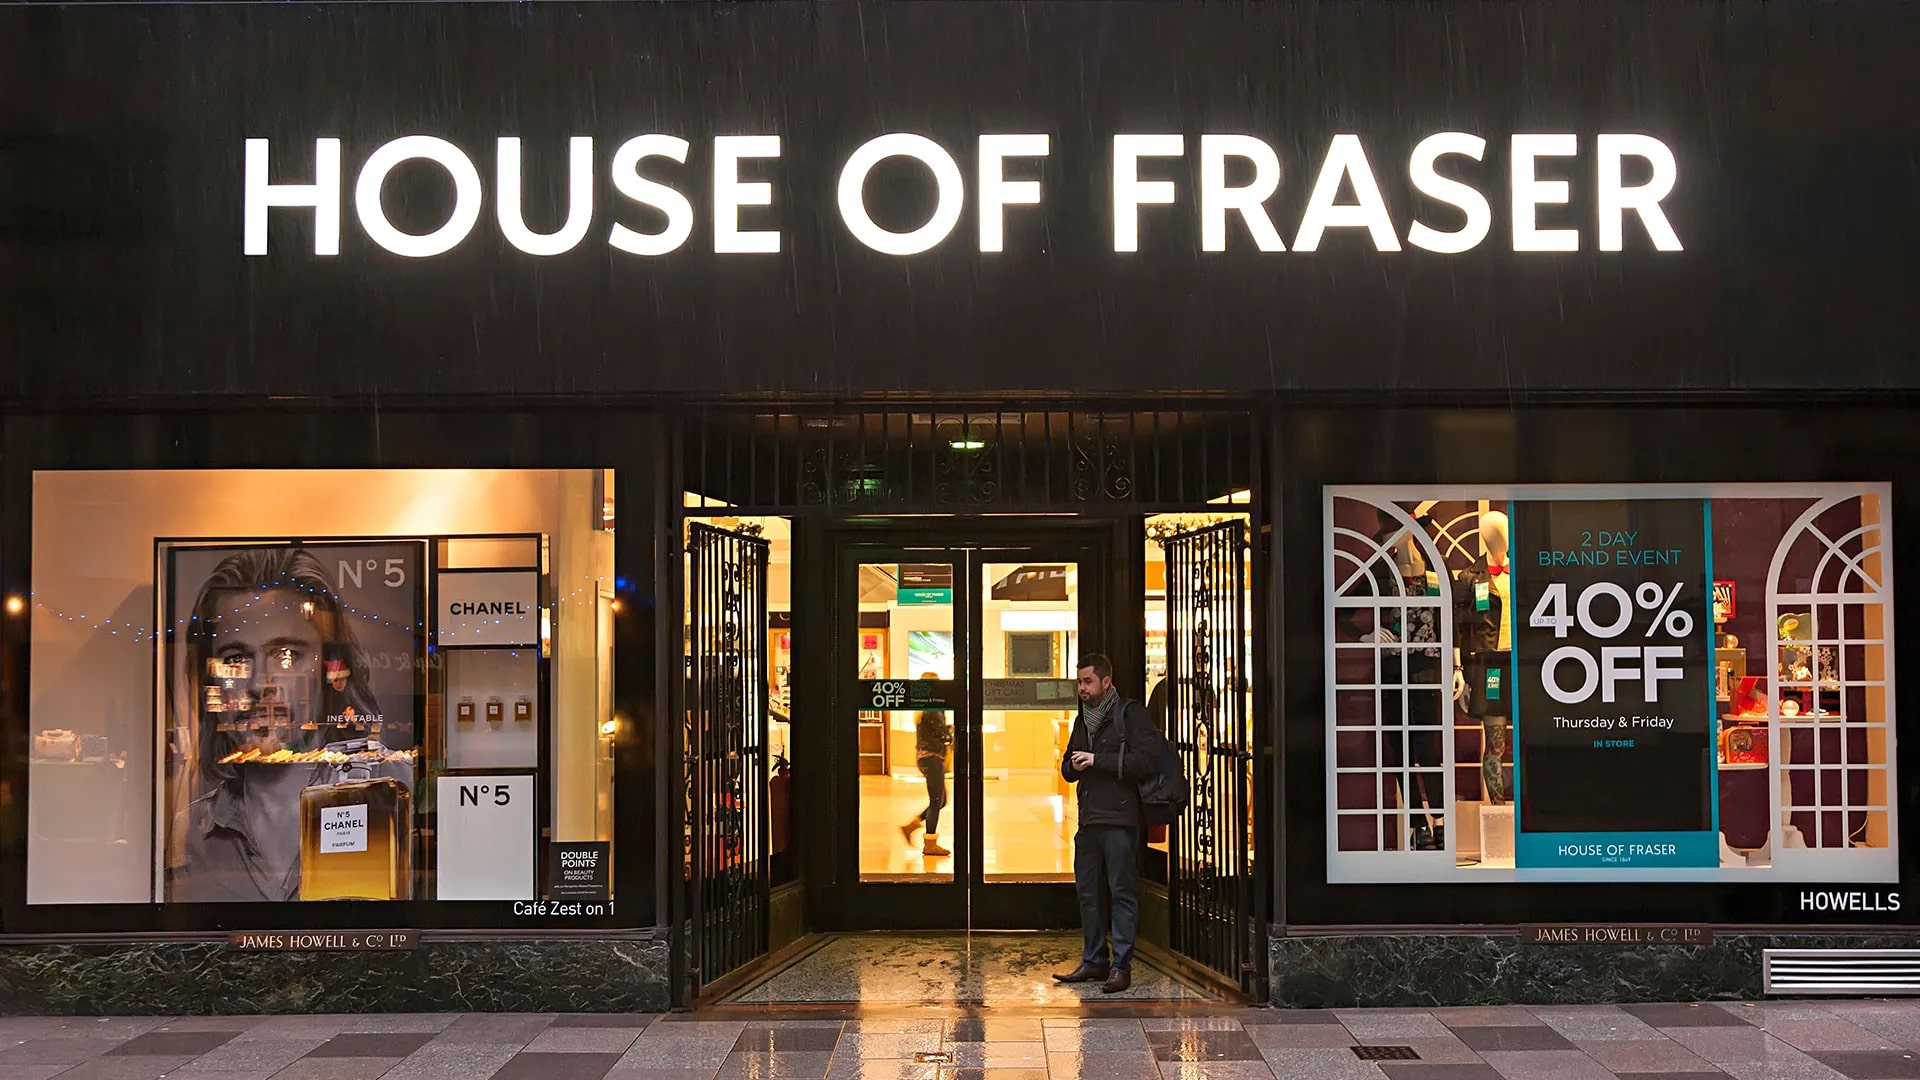 House of Fraser : Elevating Retail Excellence Through Tradition and Innovation